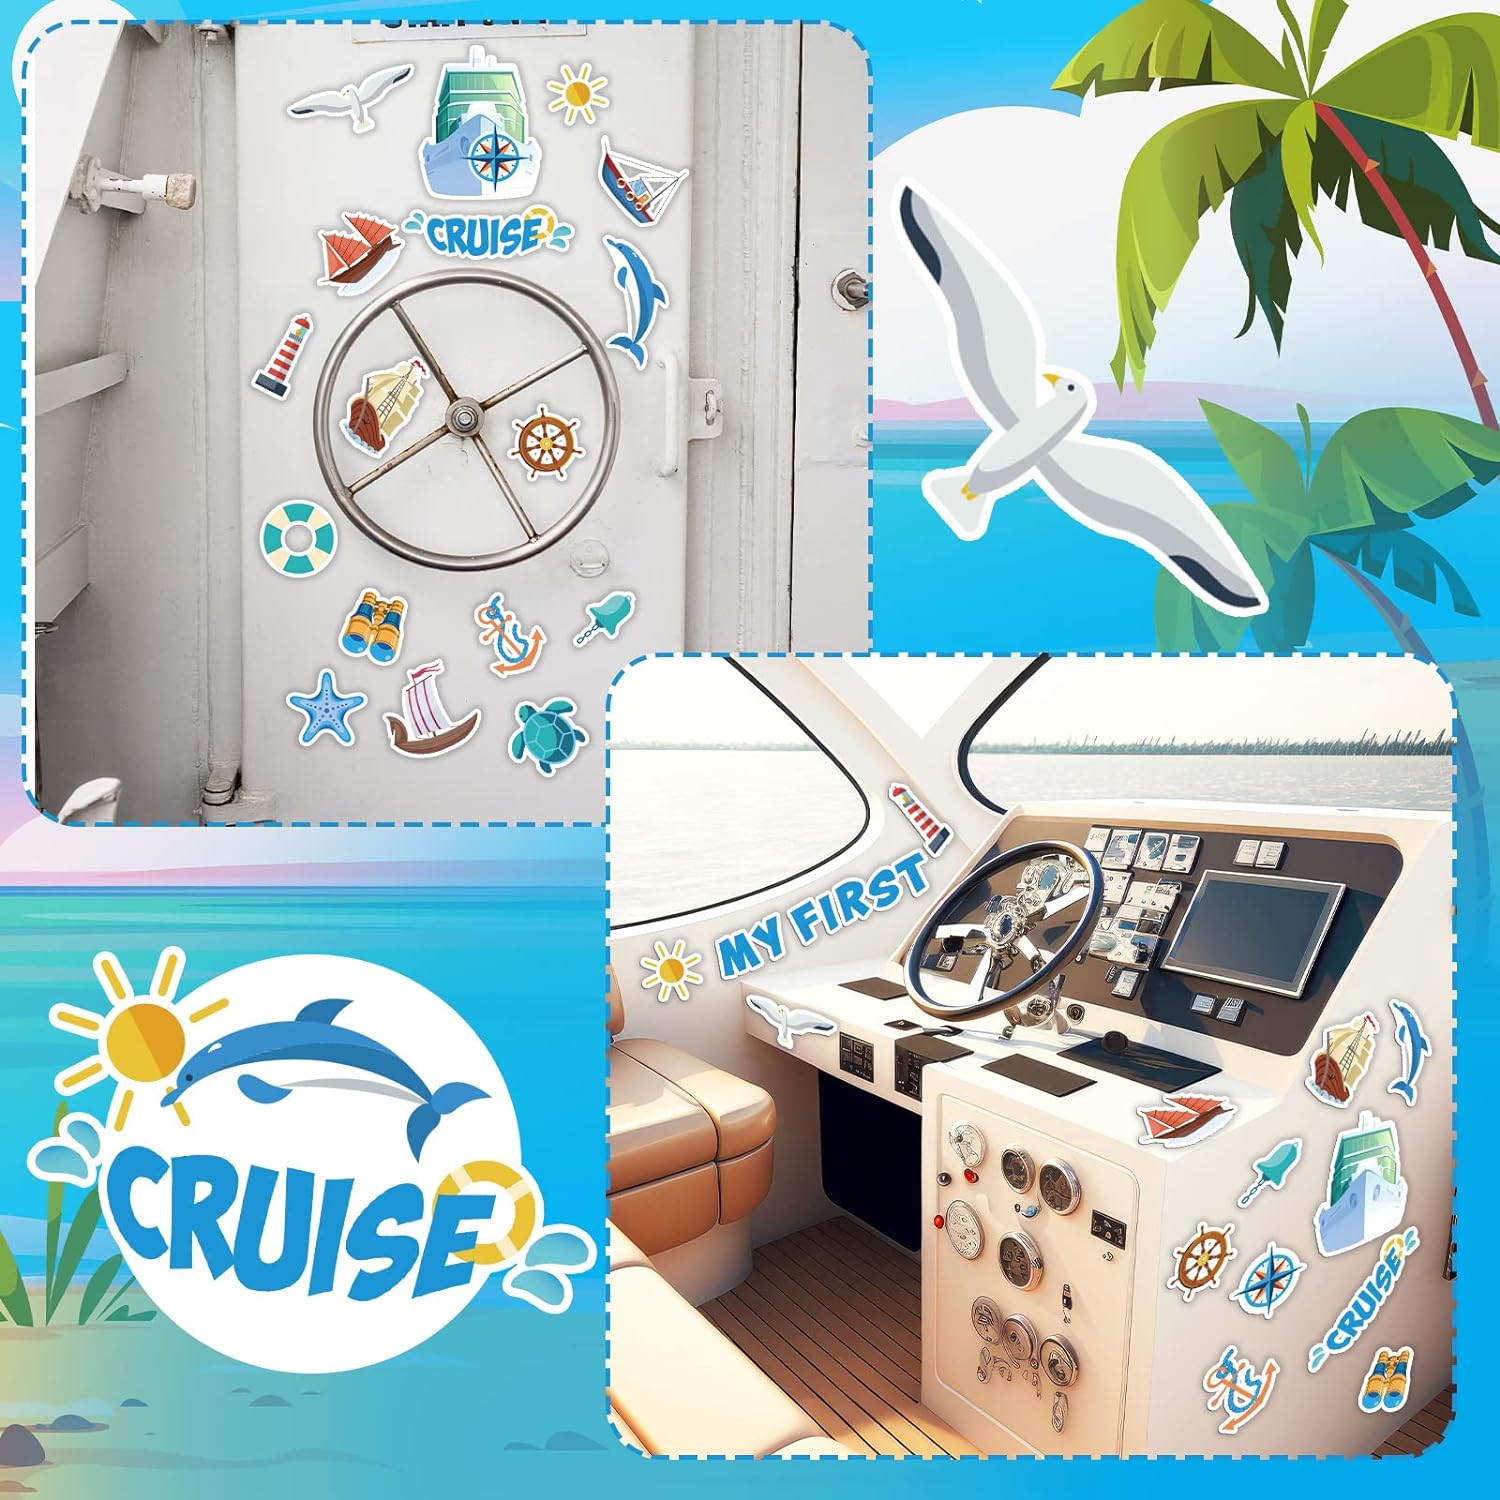 Oudain 20 Pcs First Cruise Door Magnets Boat Car Magnets Funny Cruise Door Decorations Cruise Magnets for Door Refrigerator Cruise Essentials for Carnival Cruise Ship Wheel Anchor Cruise Accessories